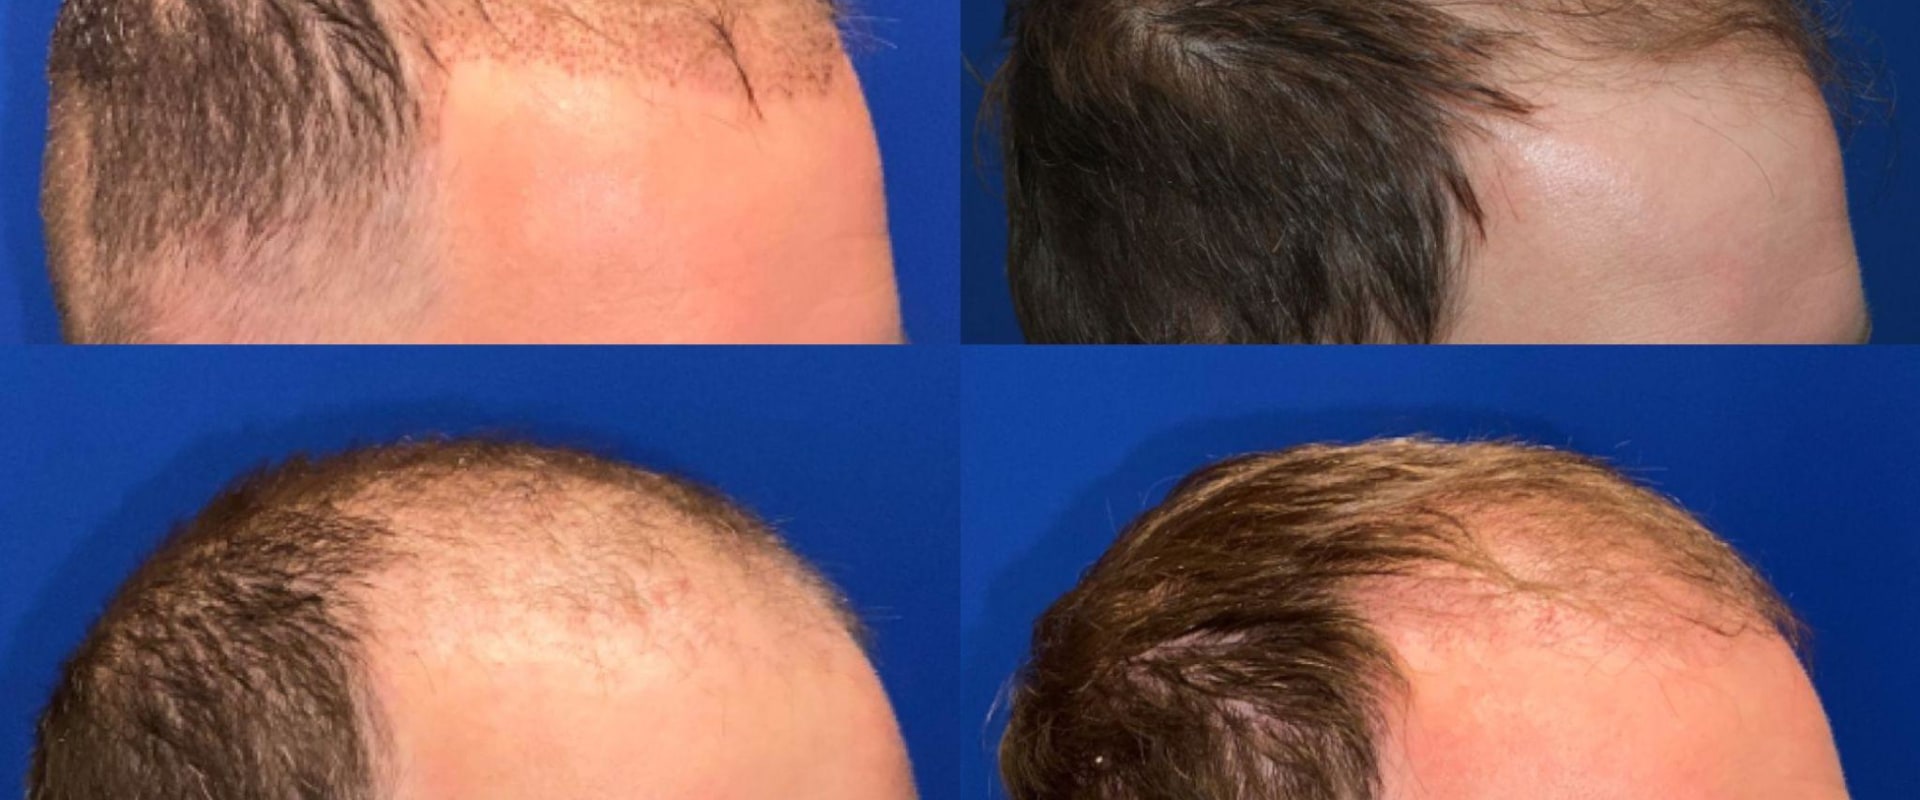 Does a Hair Transplant Last Forever?